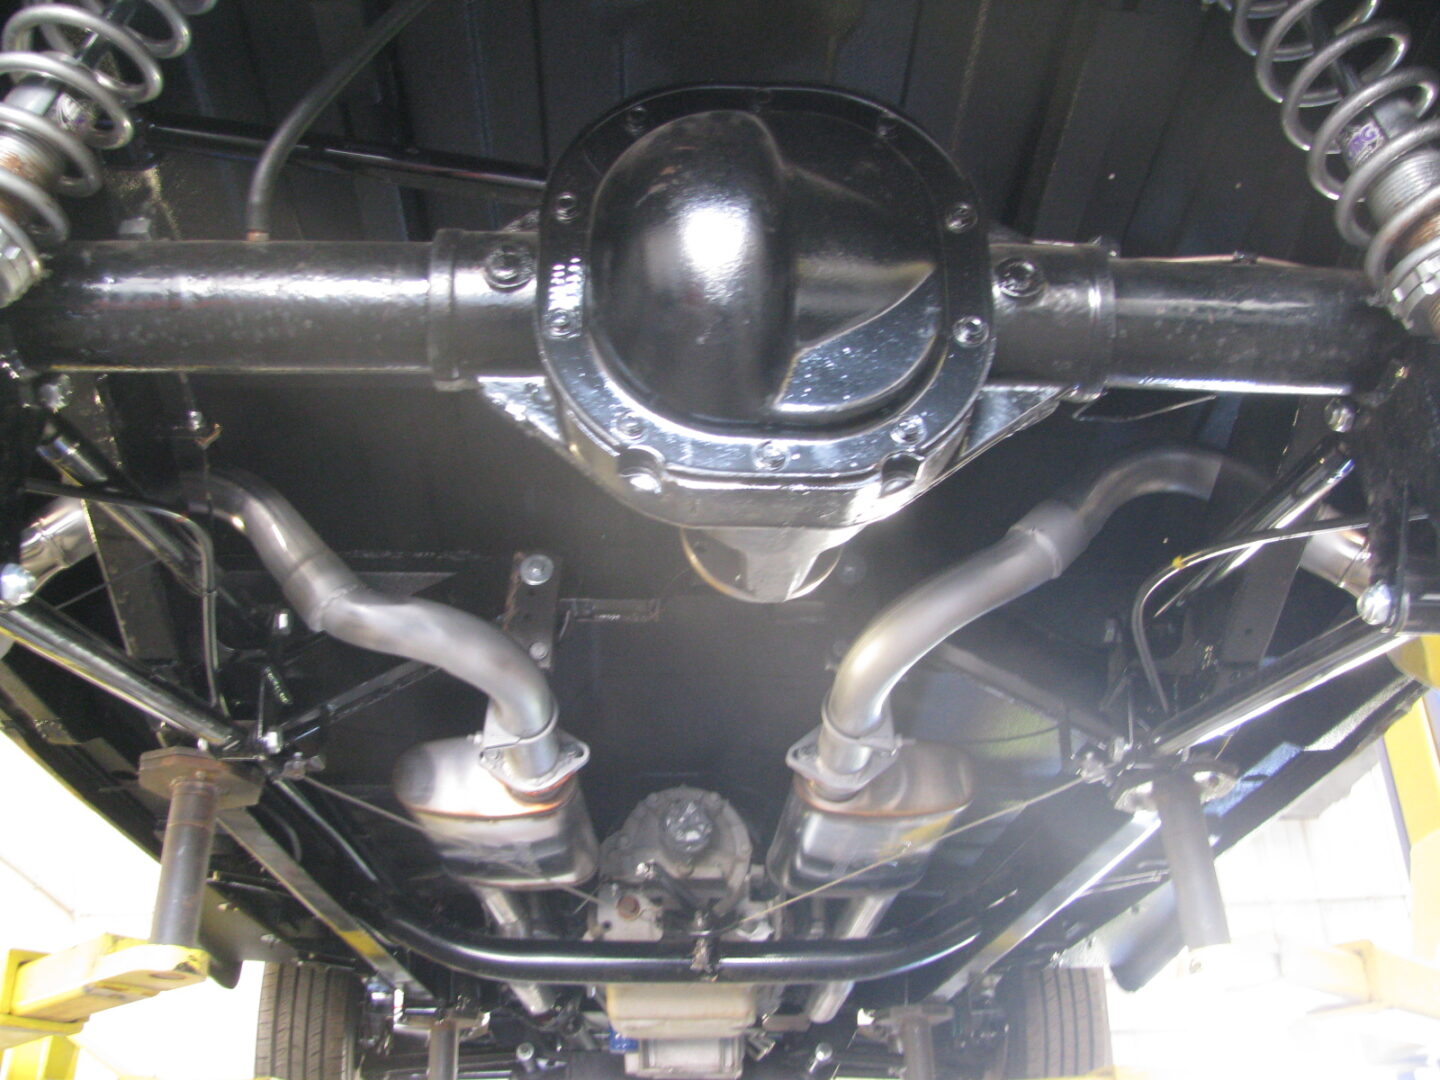 Services and Repair of Exhaust Systems - St. Cloud Exhaust